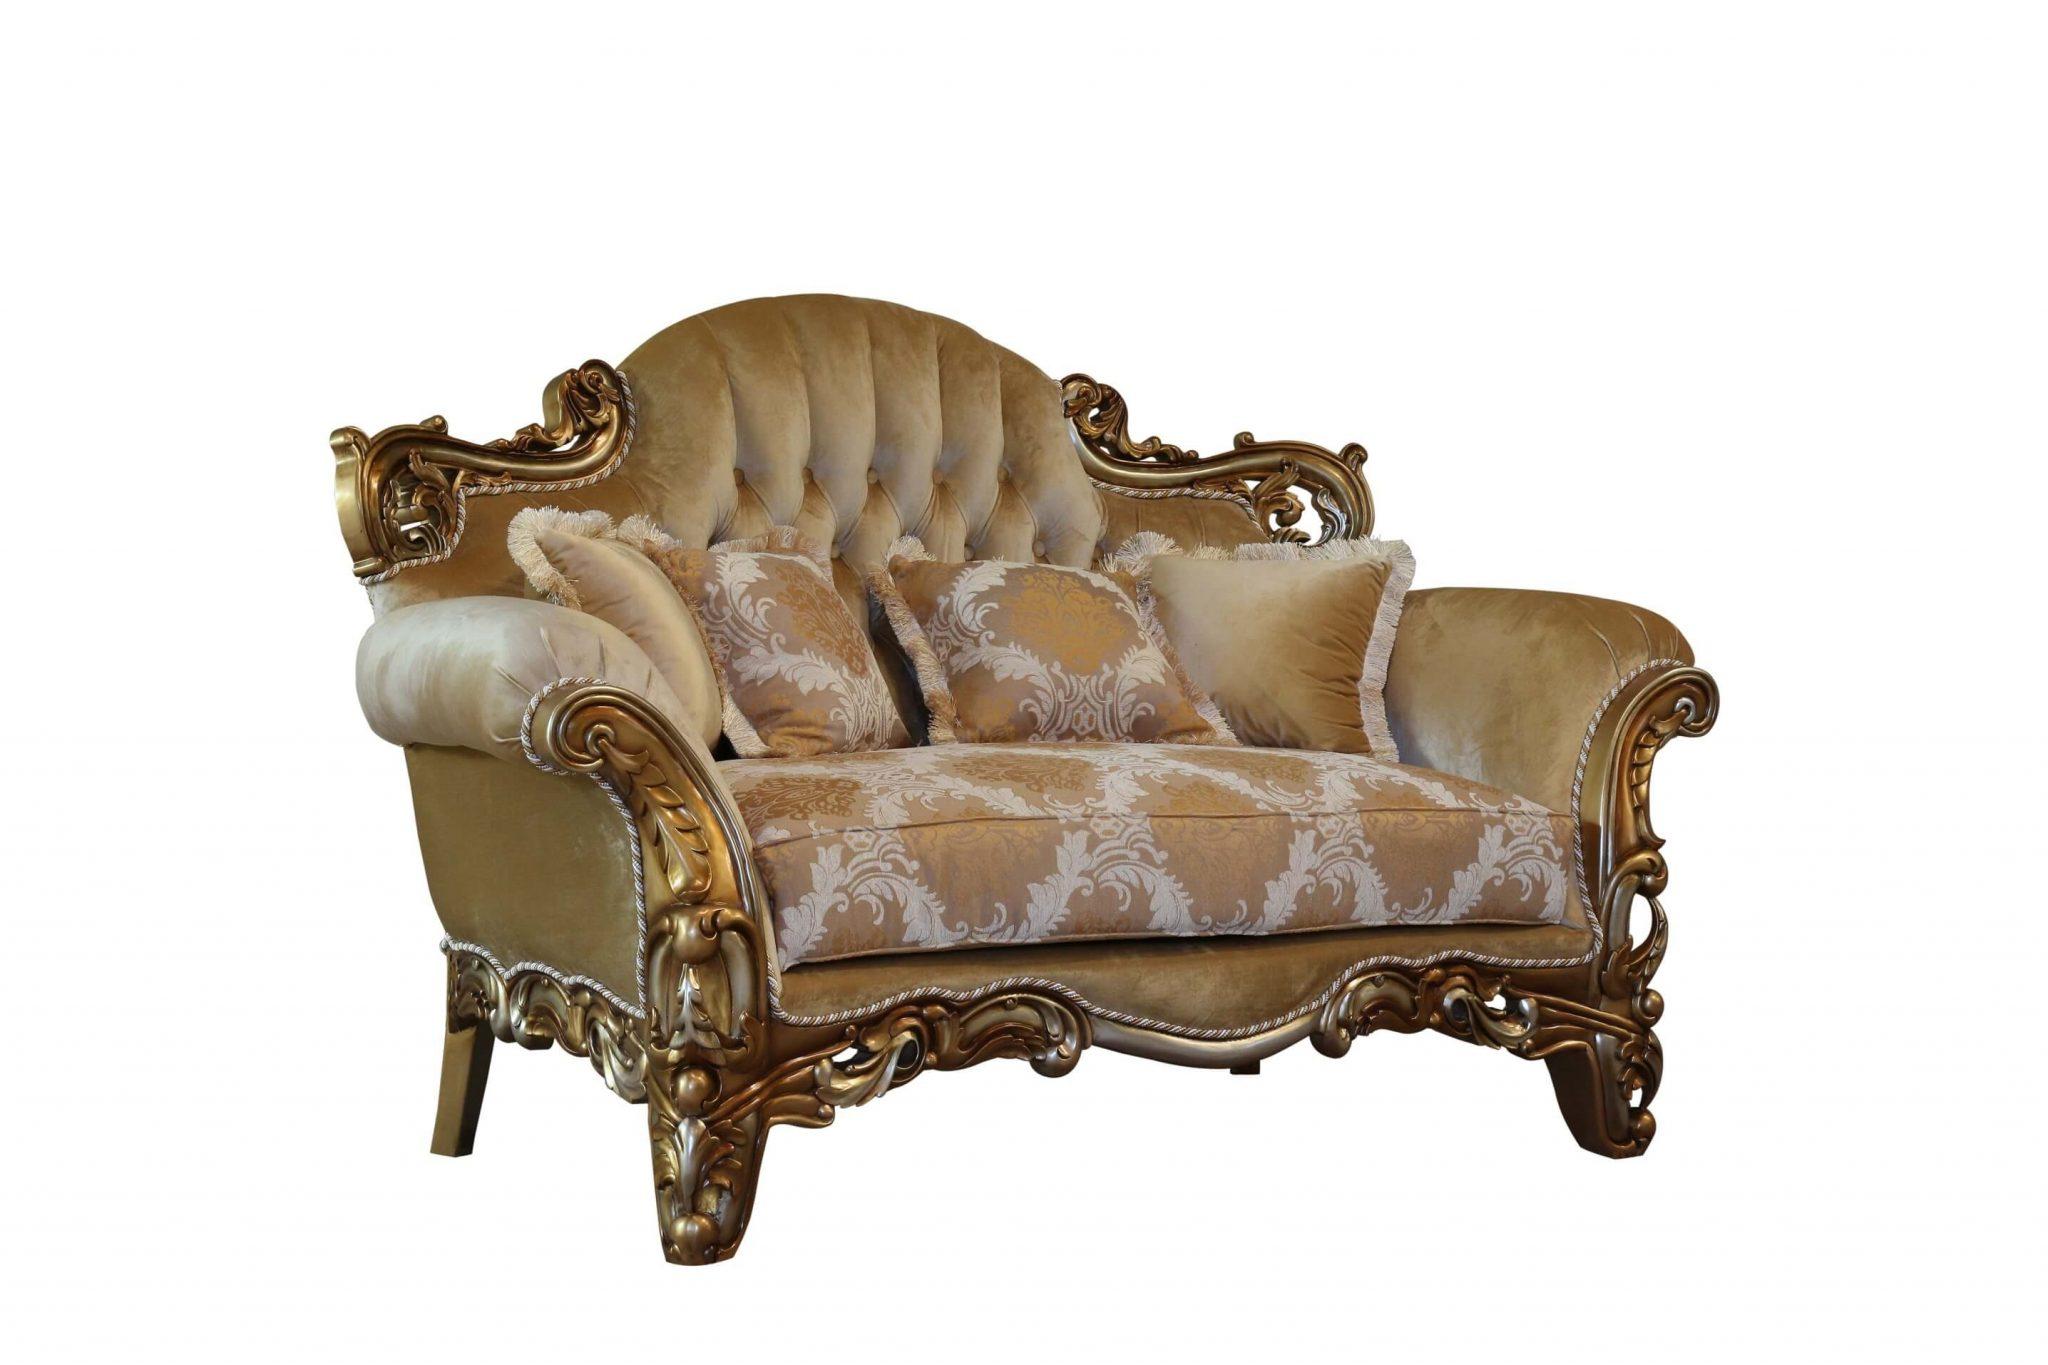 Classic, Traditional Loveseat ALEXSANDRA 43553-L in Silver, Gold, Brown Fabric